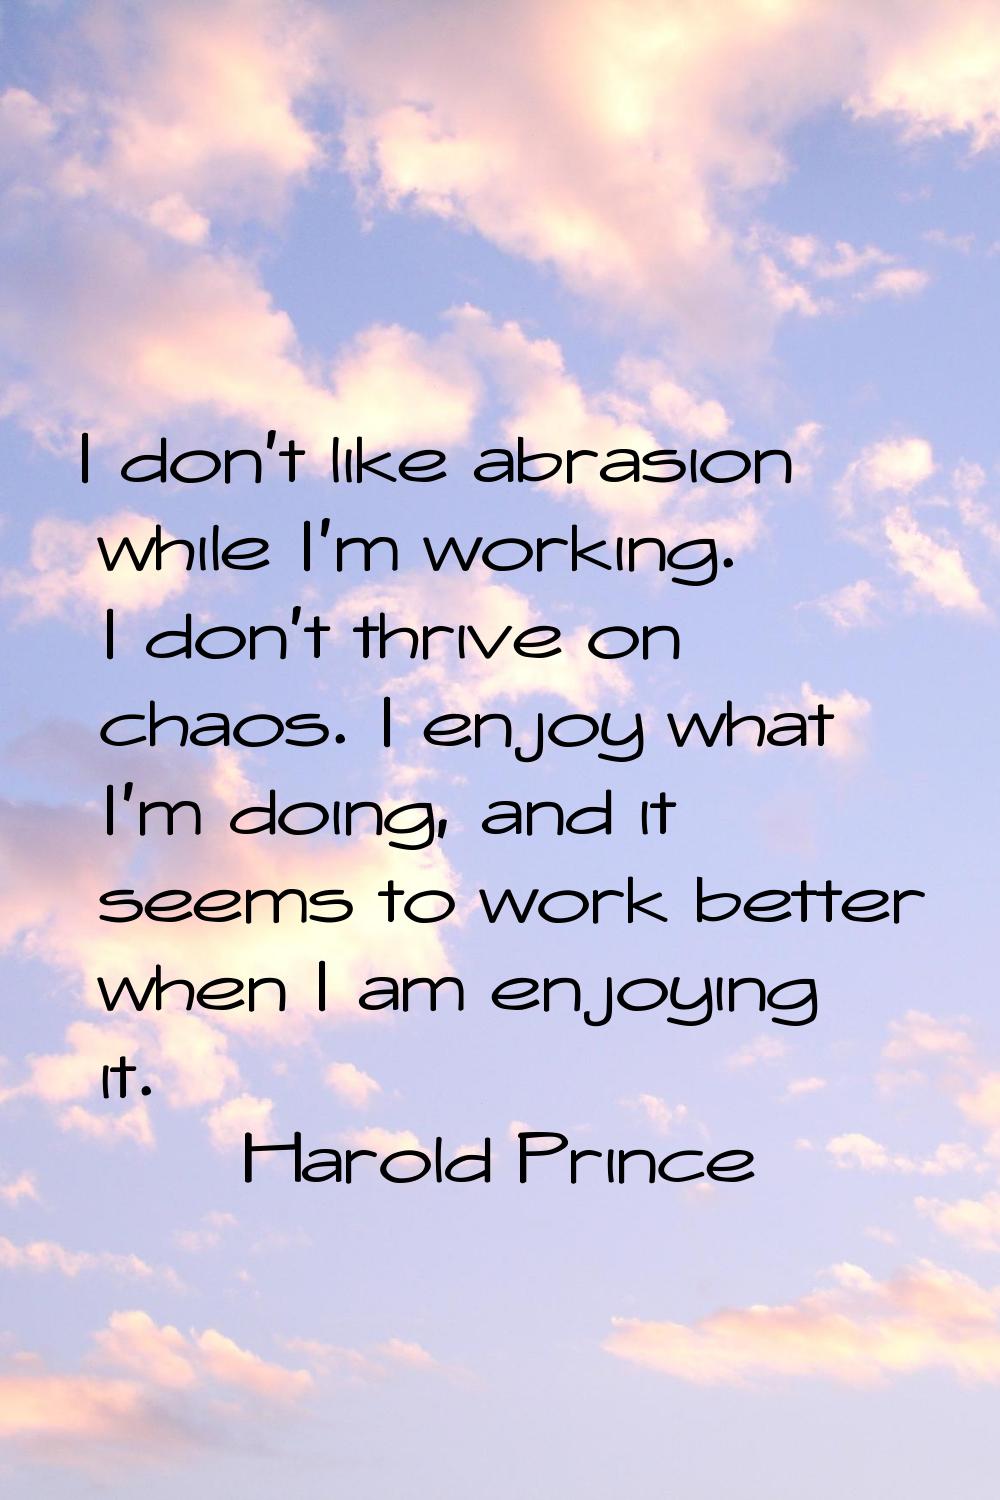 I don't like abrasion while I'm working. I don't thrive on chaos. I enjoy what I'm doing, and it se